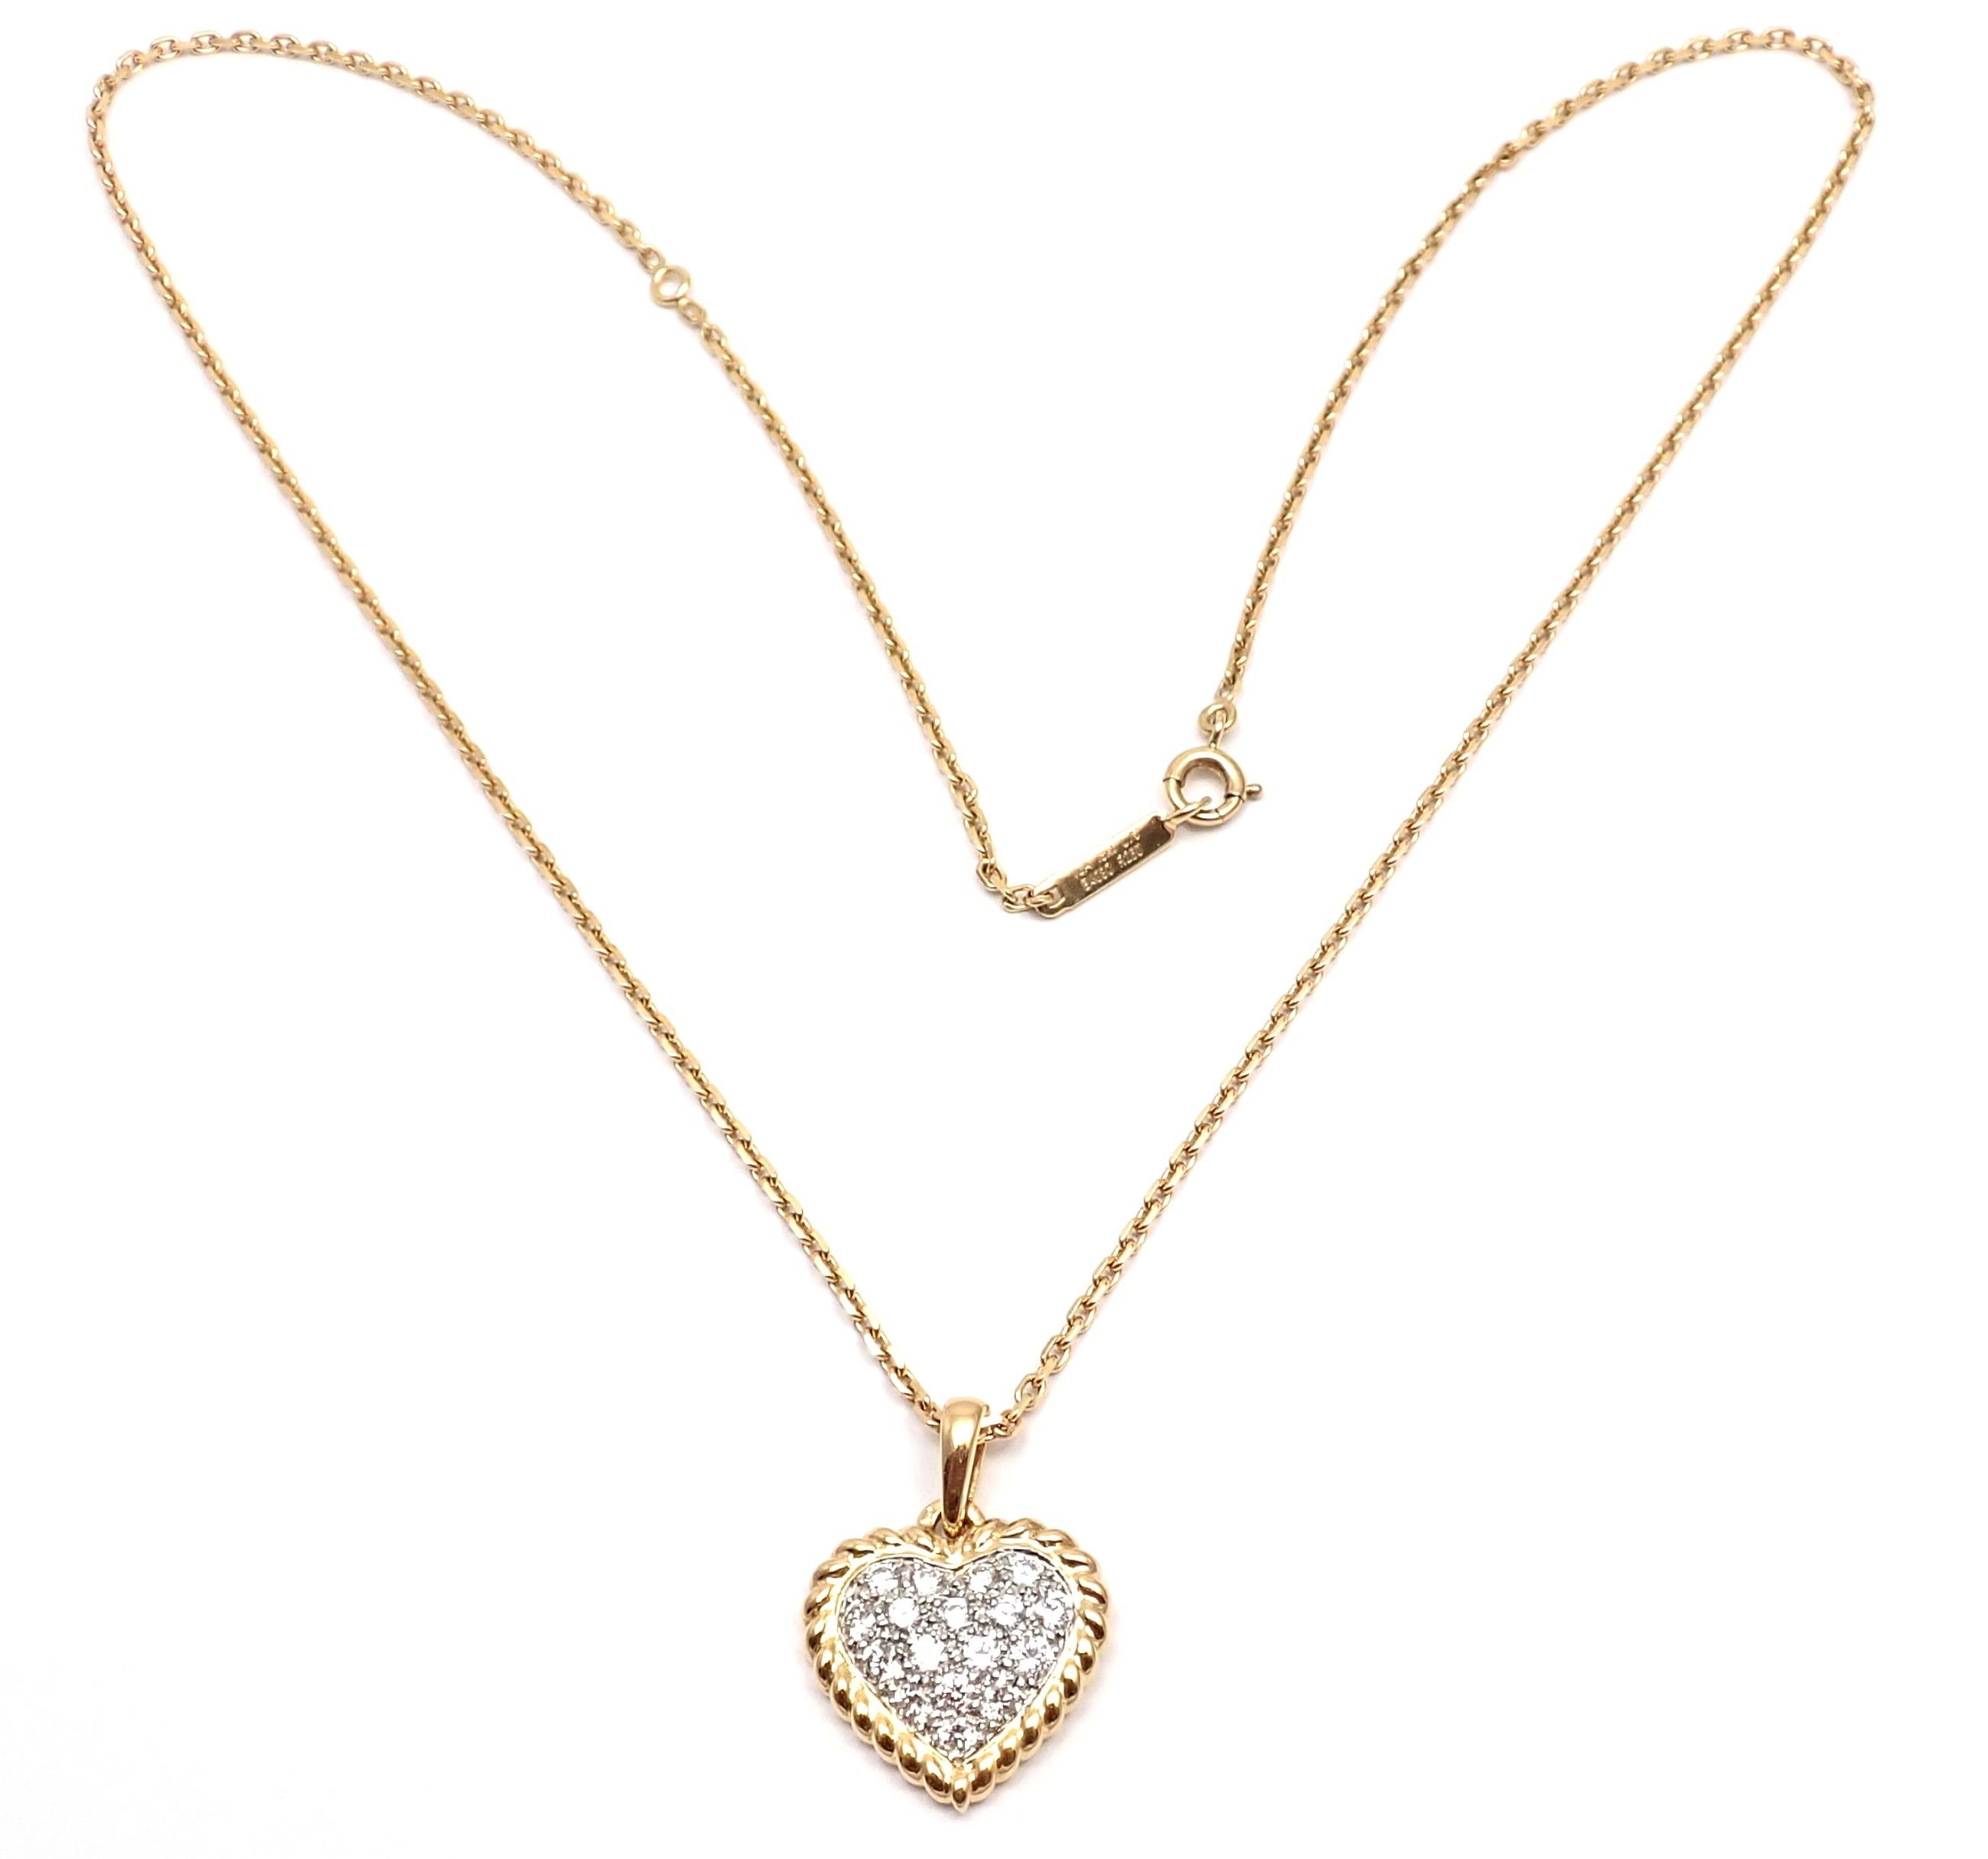 18k Yellow Gold Diamond Heart Pendant Necklace by Van Cleef & Arpels.
With 19 brilliant round cut diamonds VVS1 clarity, F color
Total weight .82ctw
Details:
18'' necklace, 1mm chain
Pendant: 24mm x 18mm
Weight: 9.2 grams
Stamped Hallmarks: 